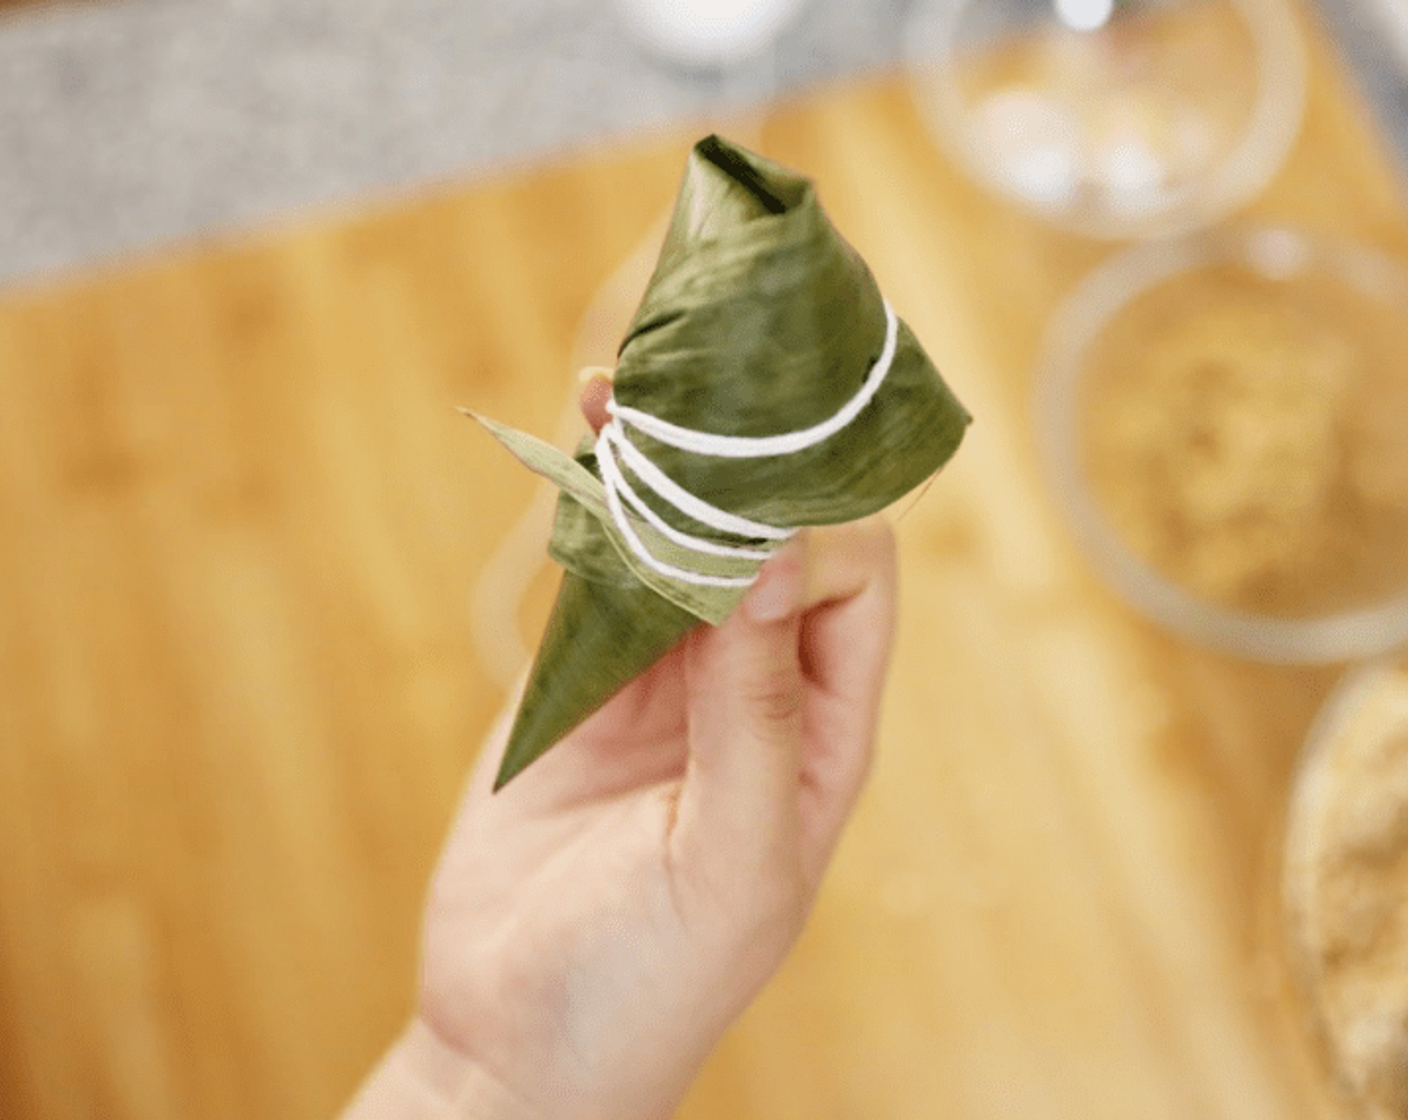 step 9 Finally filled with glutinous rice again, but do not fill the leaf to the top. With the palm leaf facing down on a flat surface, wrap the dumplings with a cotton line.